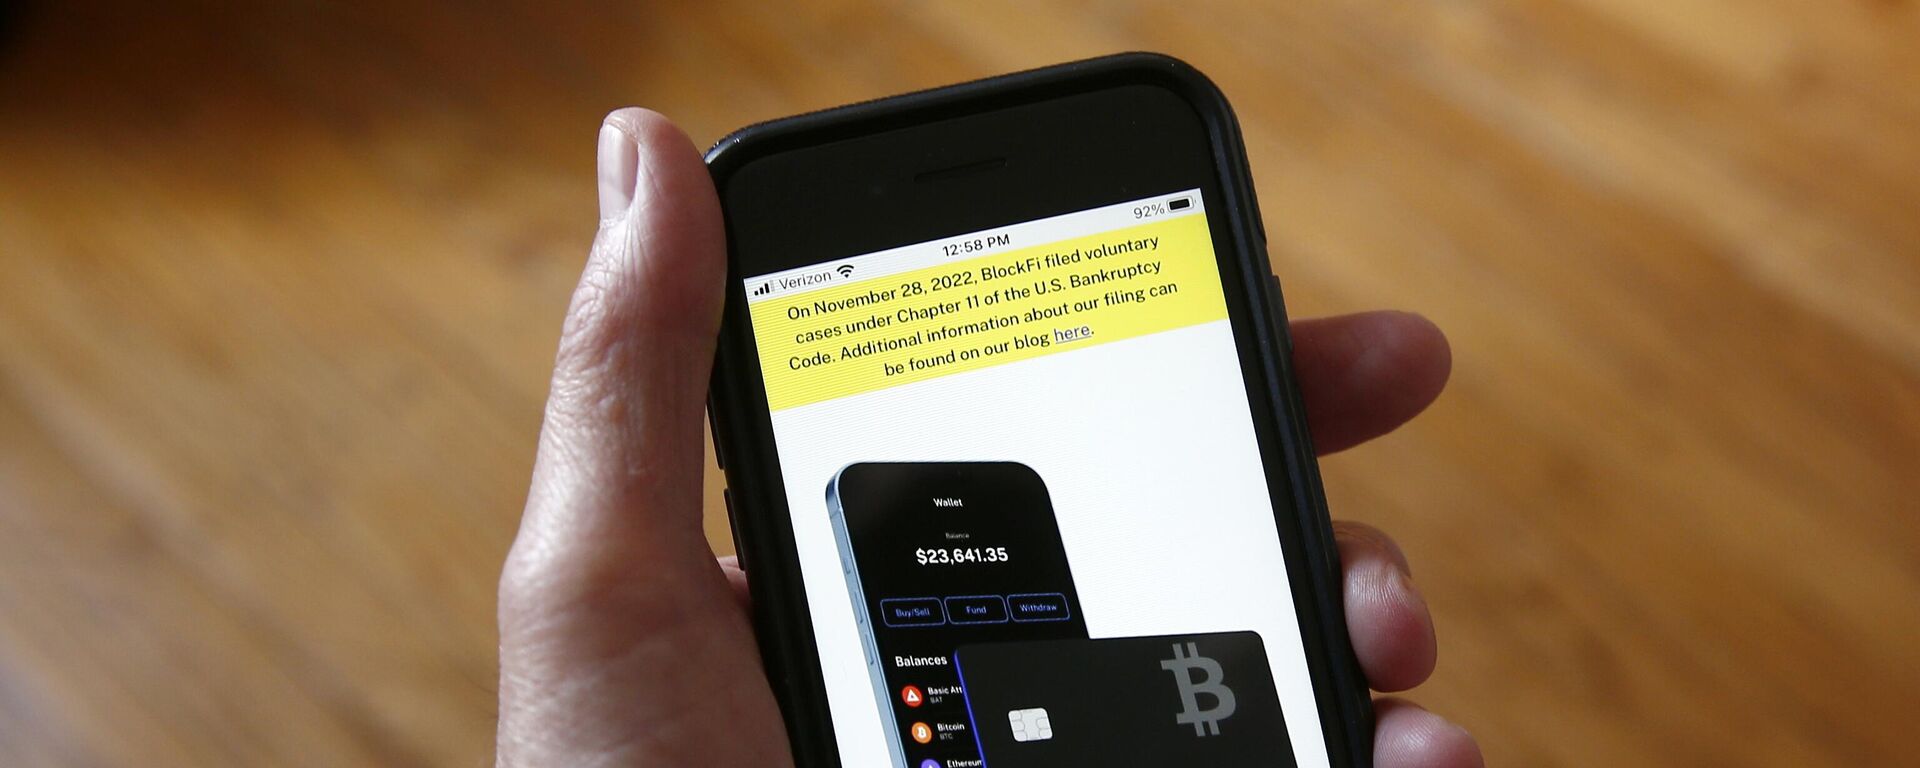 Text, in yellow, announcing cryptocurrency lender BlockFi's bankruptcy filing appears on the company website on a smart phone on Monday, Nov. 28, 2022, in New York. BlockFi said that it was filing for bankruptcy protection to stabilize its business and give it the chance to perform a restructuring. - Sputnik International, 1920, 29.11.2022